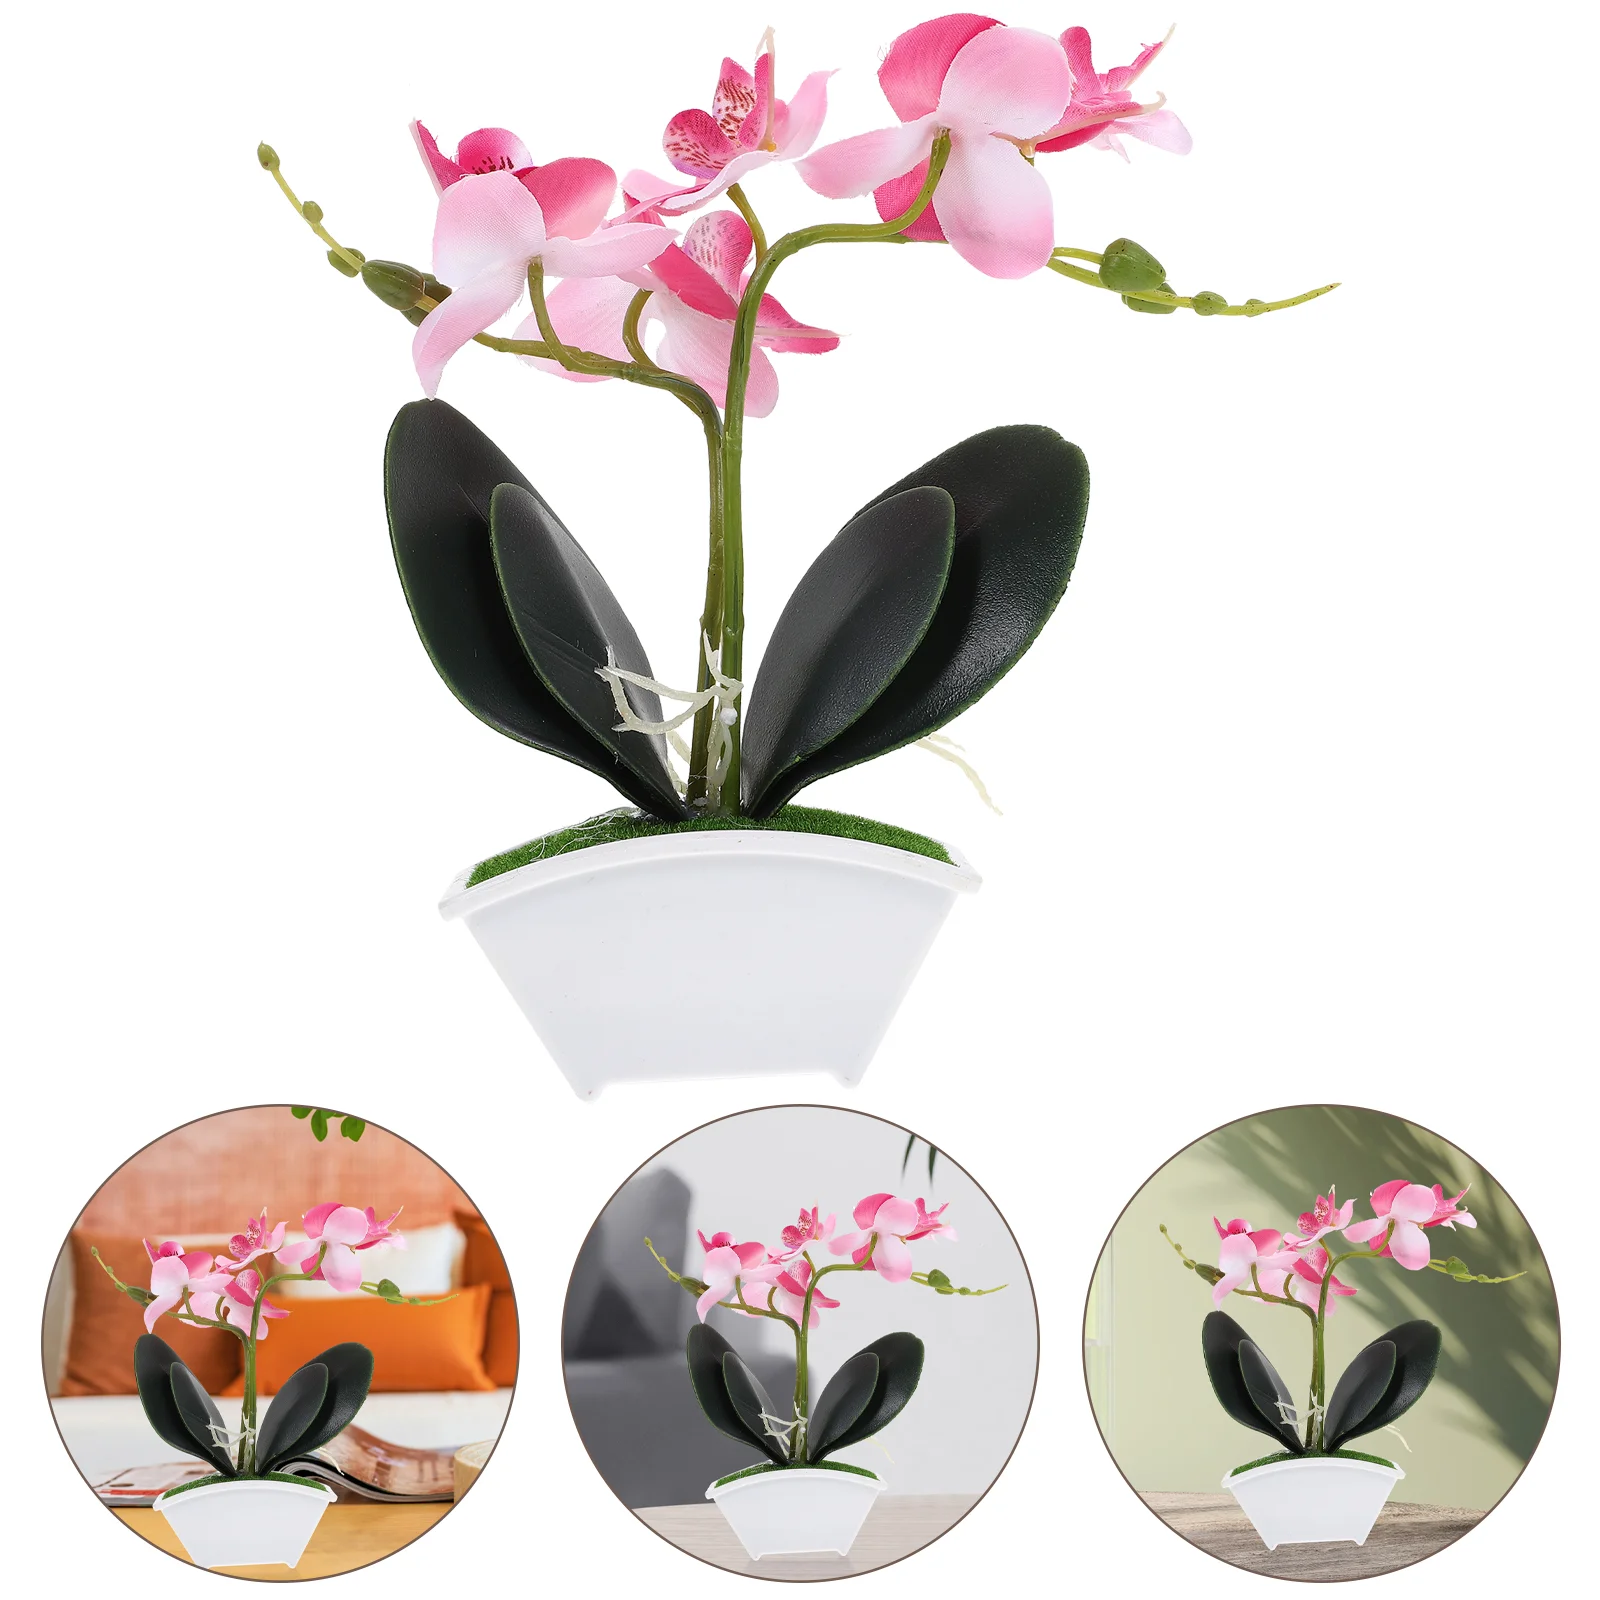 

Orchid Bathroom Decor Table Artificial Ornament Spring Potted Plants Mini Orchids Flower Centerpieces Tables Fake